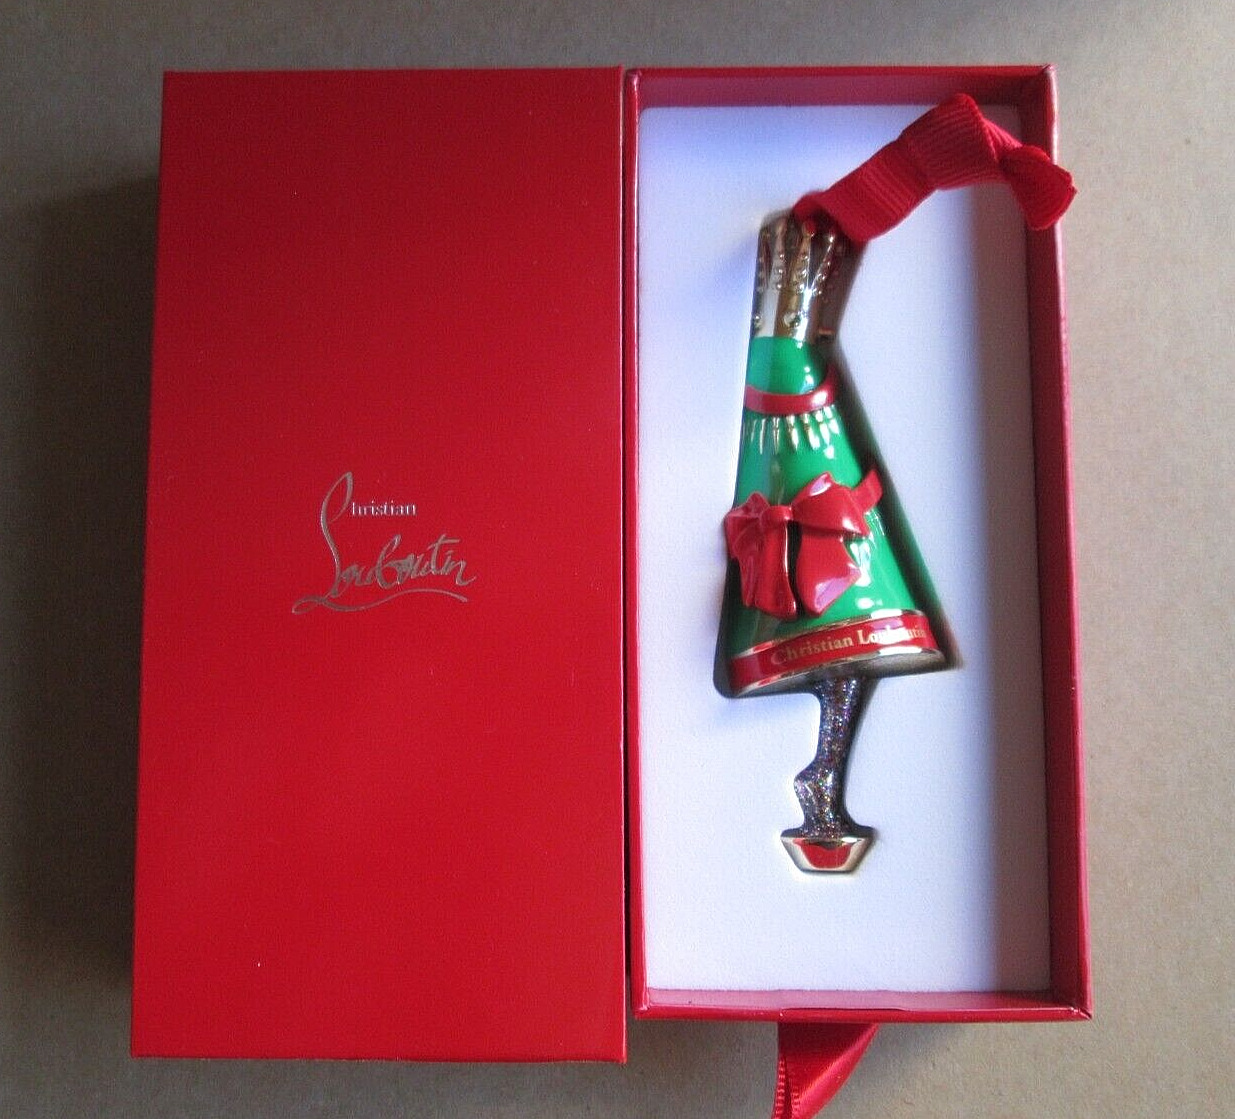 CHRISTIAN LOUBOUTIN 2021 CHRISTMAS TREE ORNAMENT NEW IN BOX VERY RARE